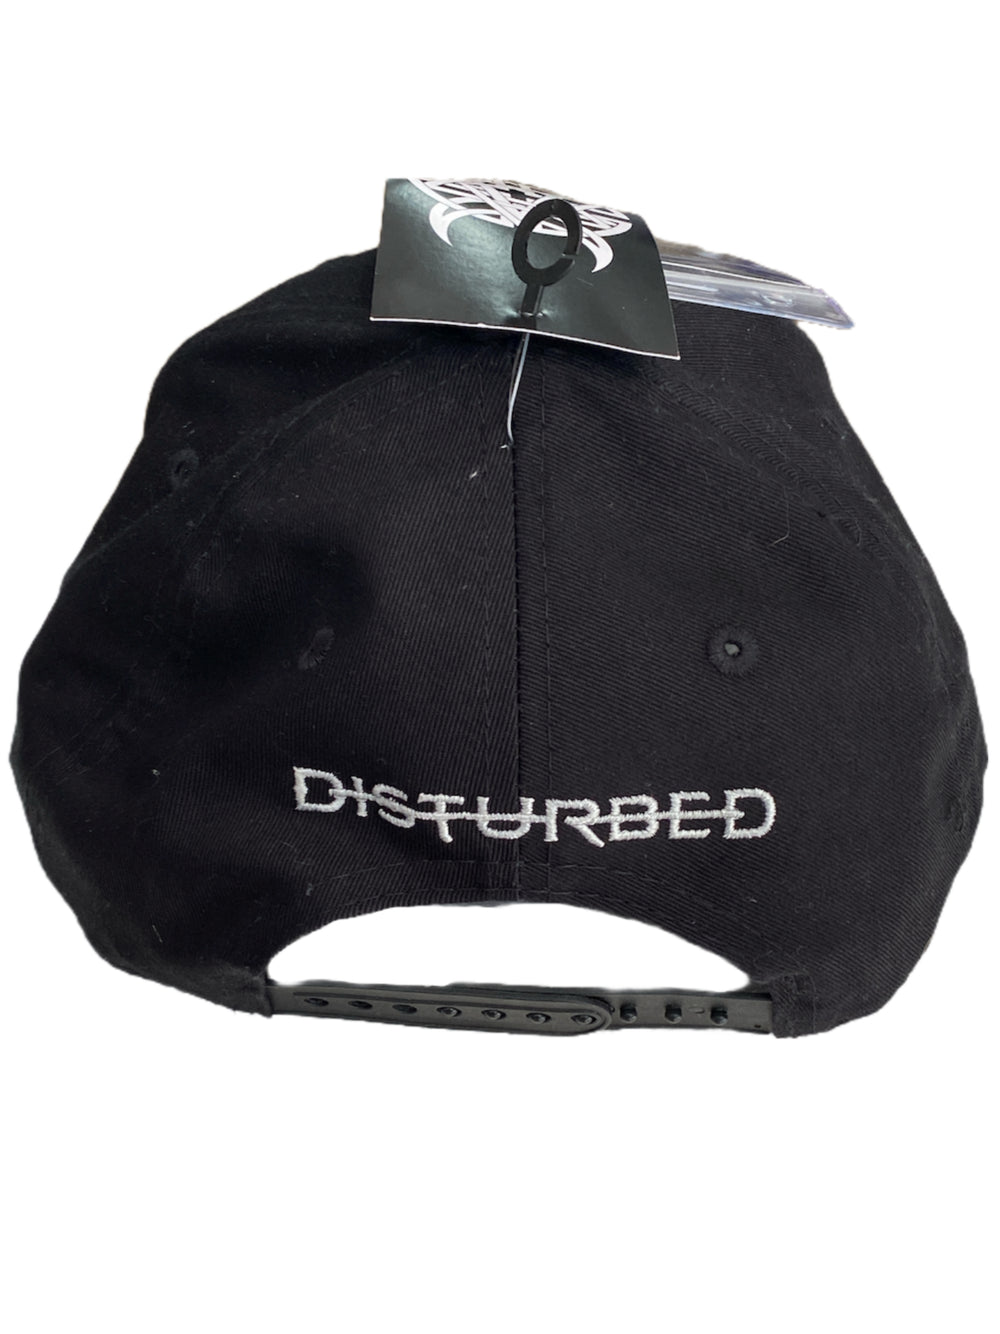 Disturbed Official Silver Sonic / Embroidered Peak Cap Adjustable Brand New